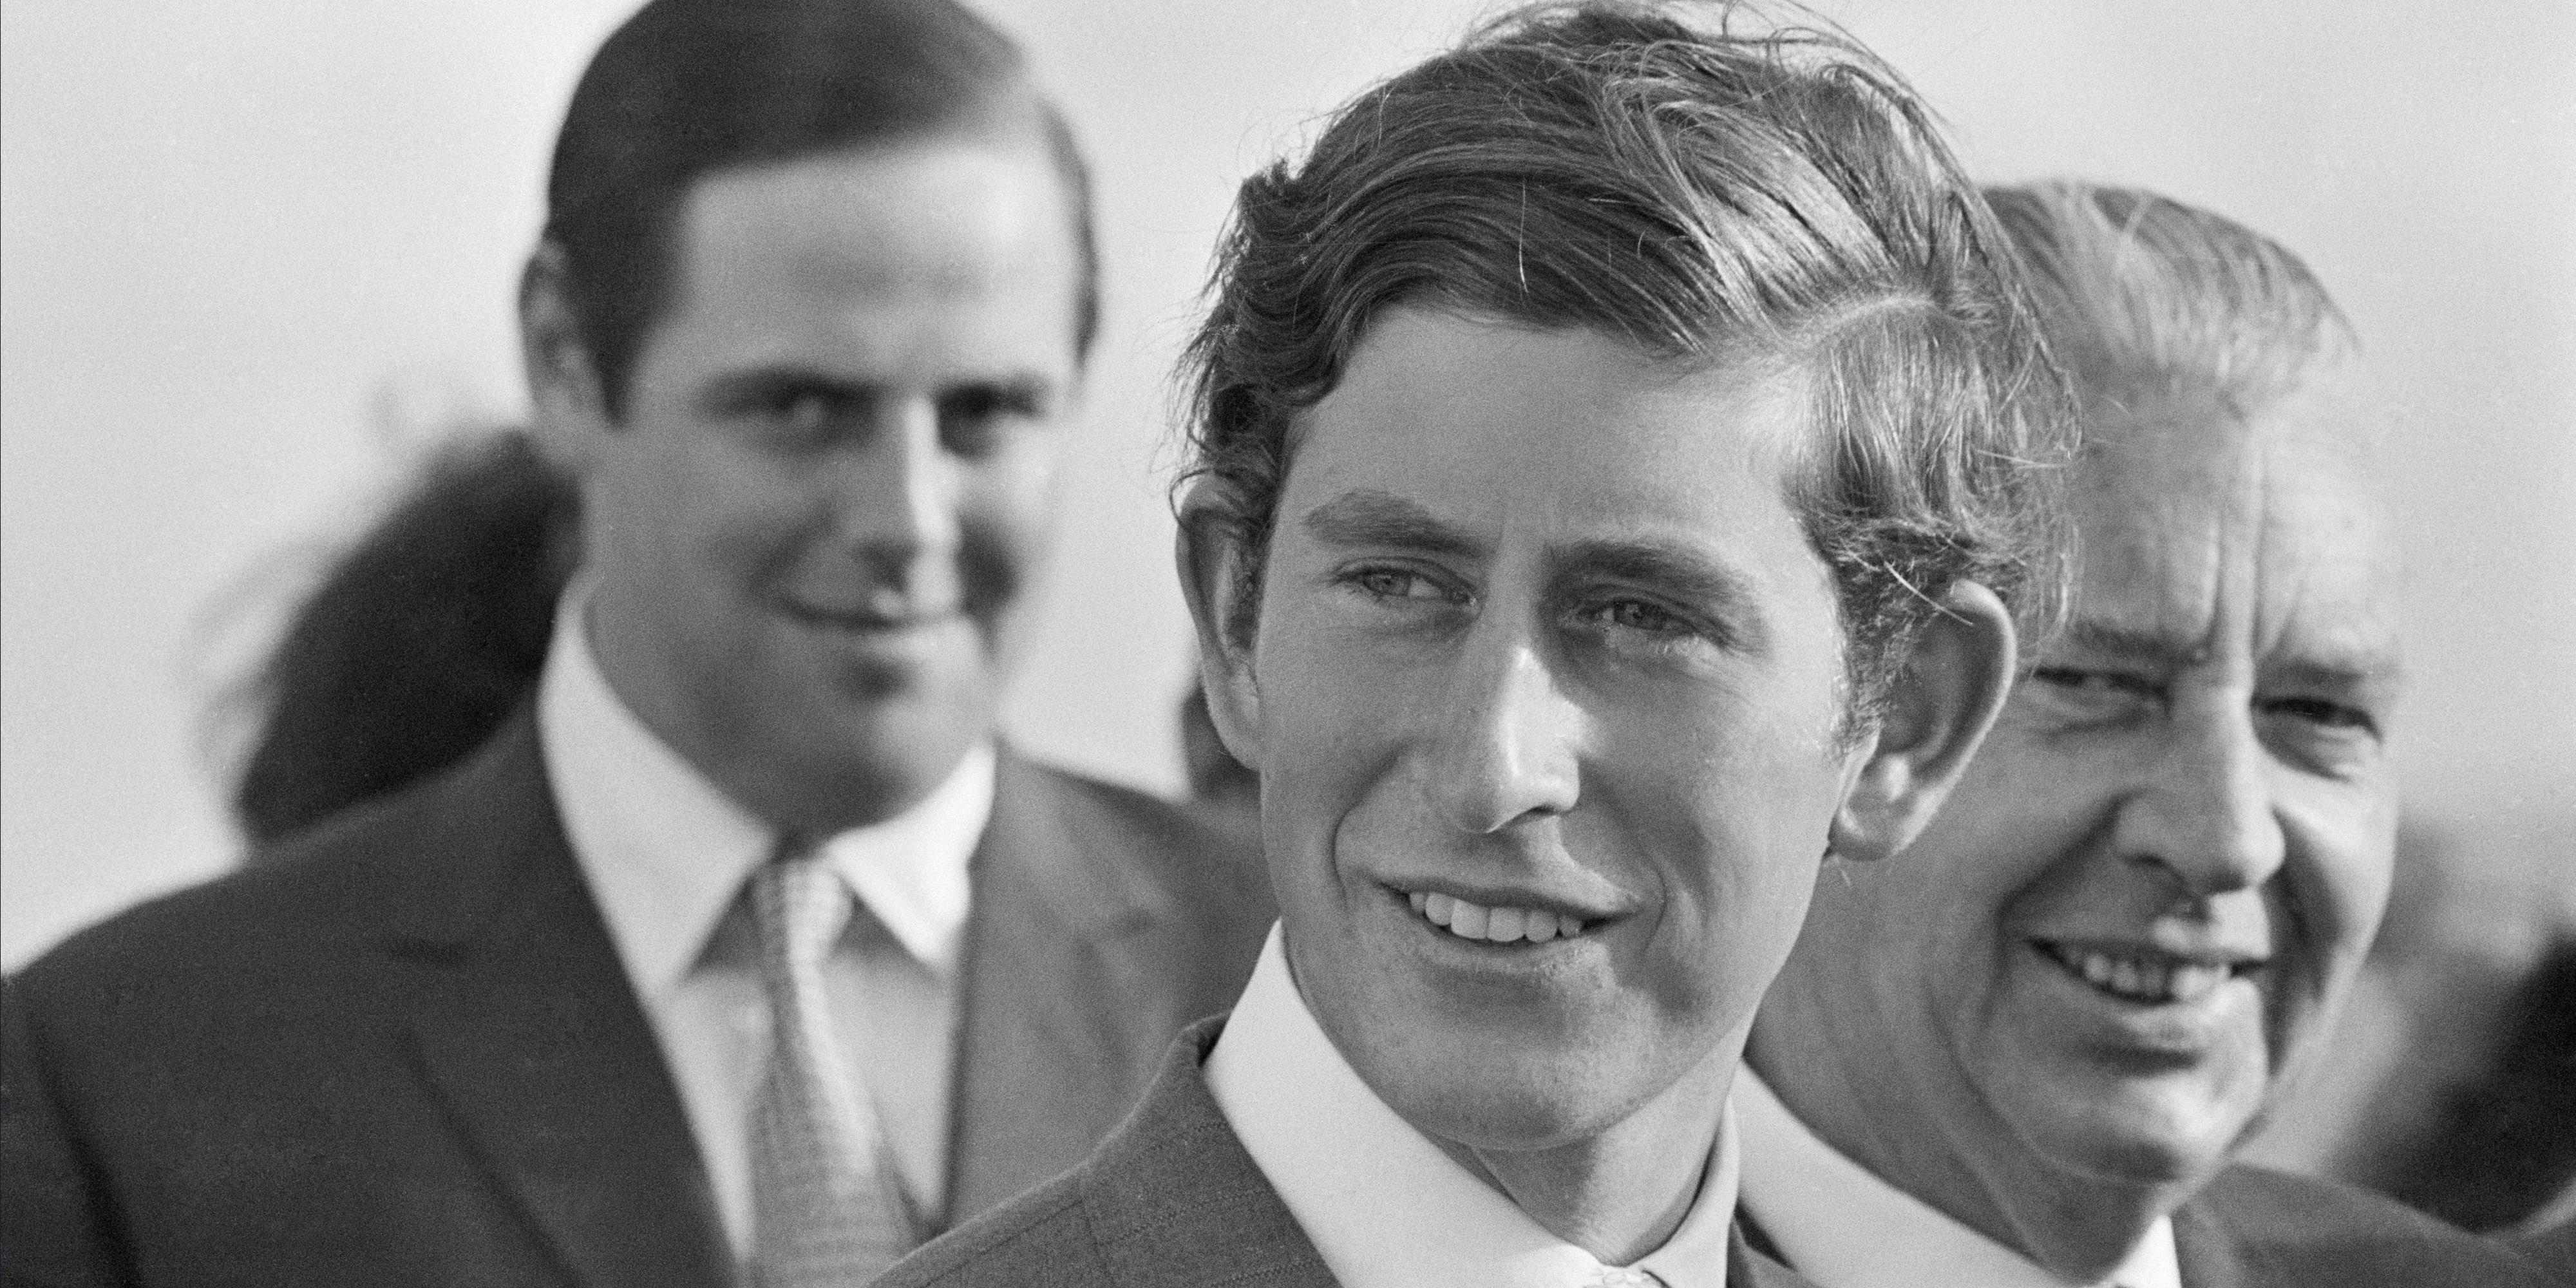 King Charles Pictures - Photos Of Prince Charles Throughout His Life